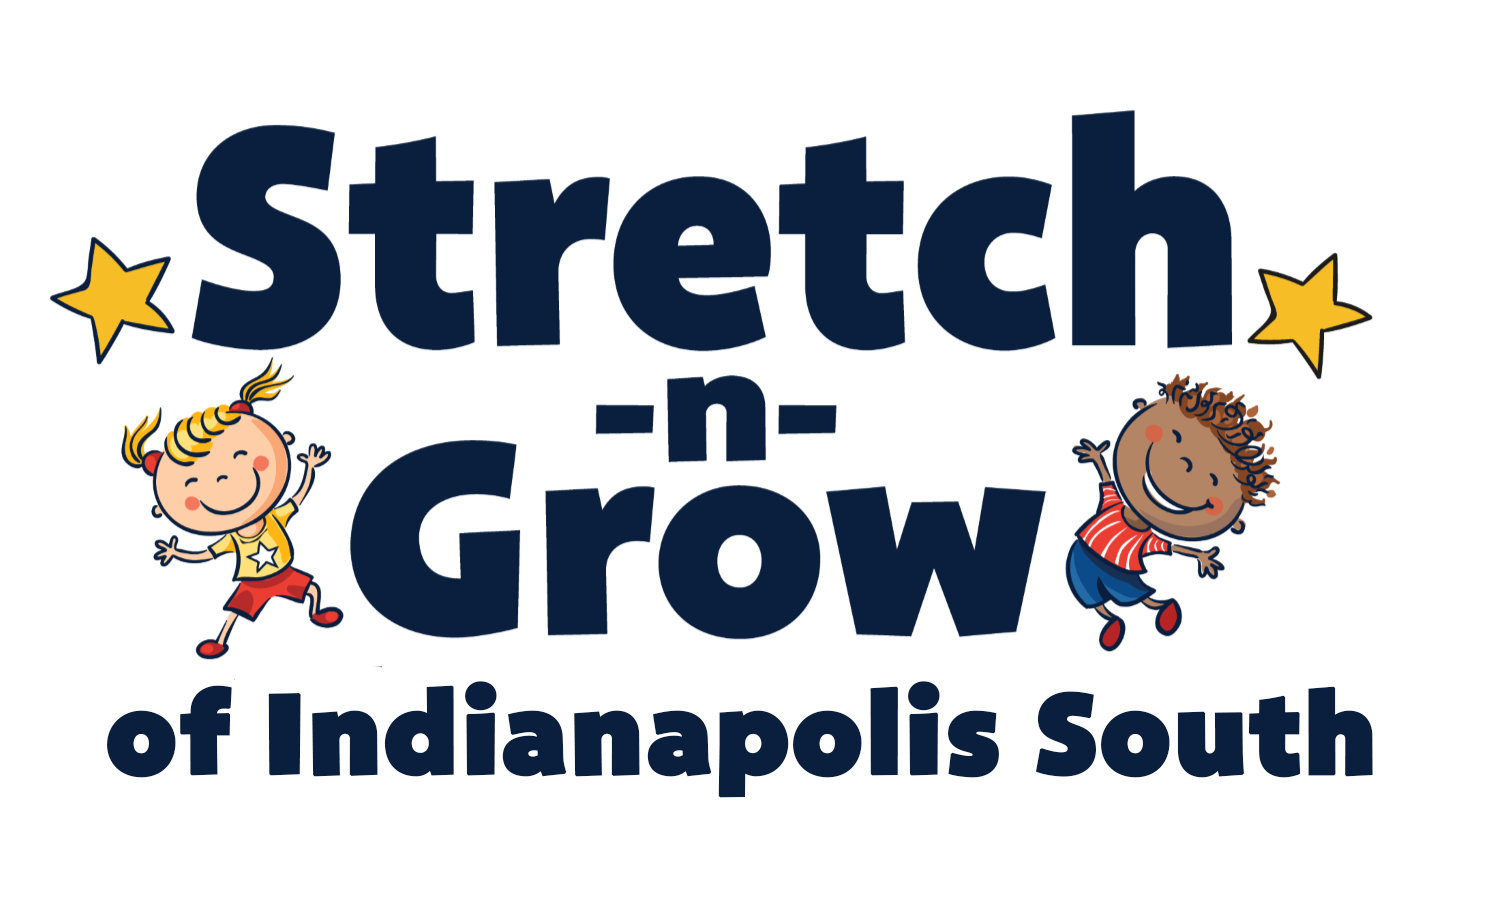 Stretch-n-Grow of Indianapolis South, #1 Child Enrichment Program